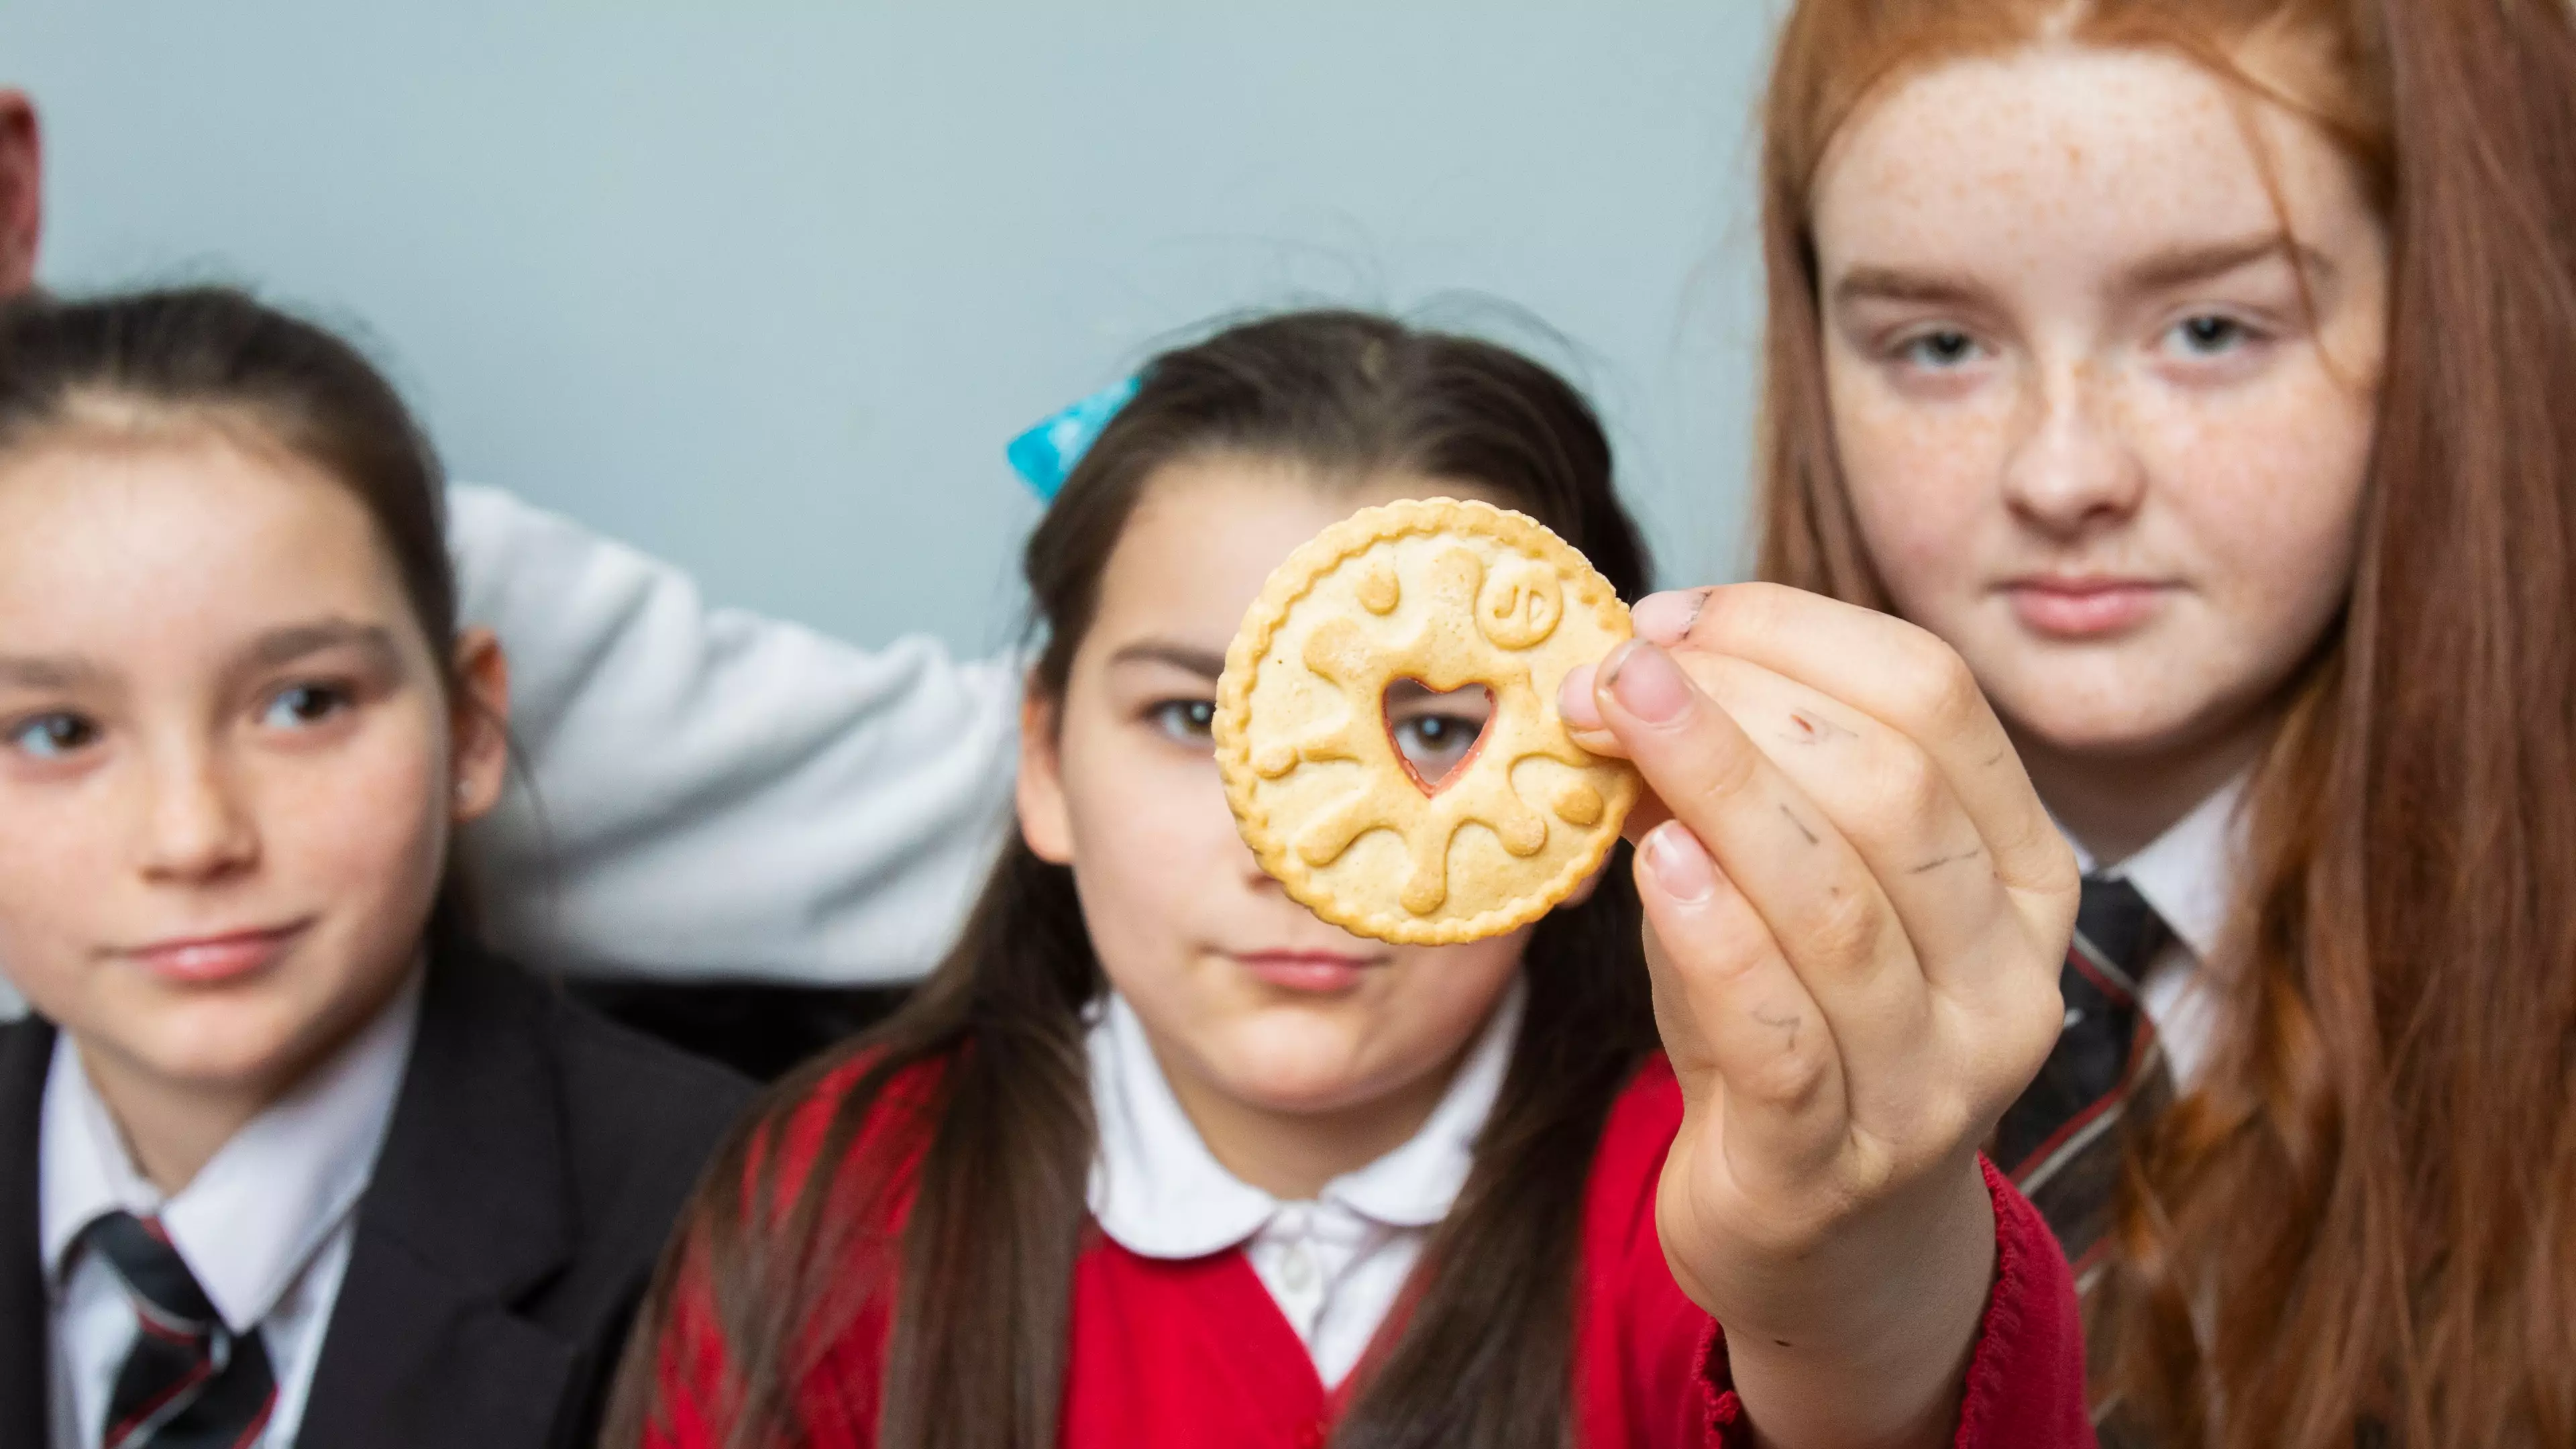 Family Open Packet Of Jammie Dodgers To Find Completely Jam-Less Biscuits